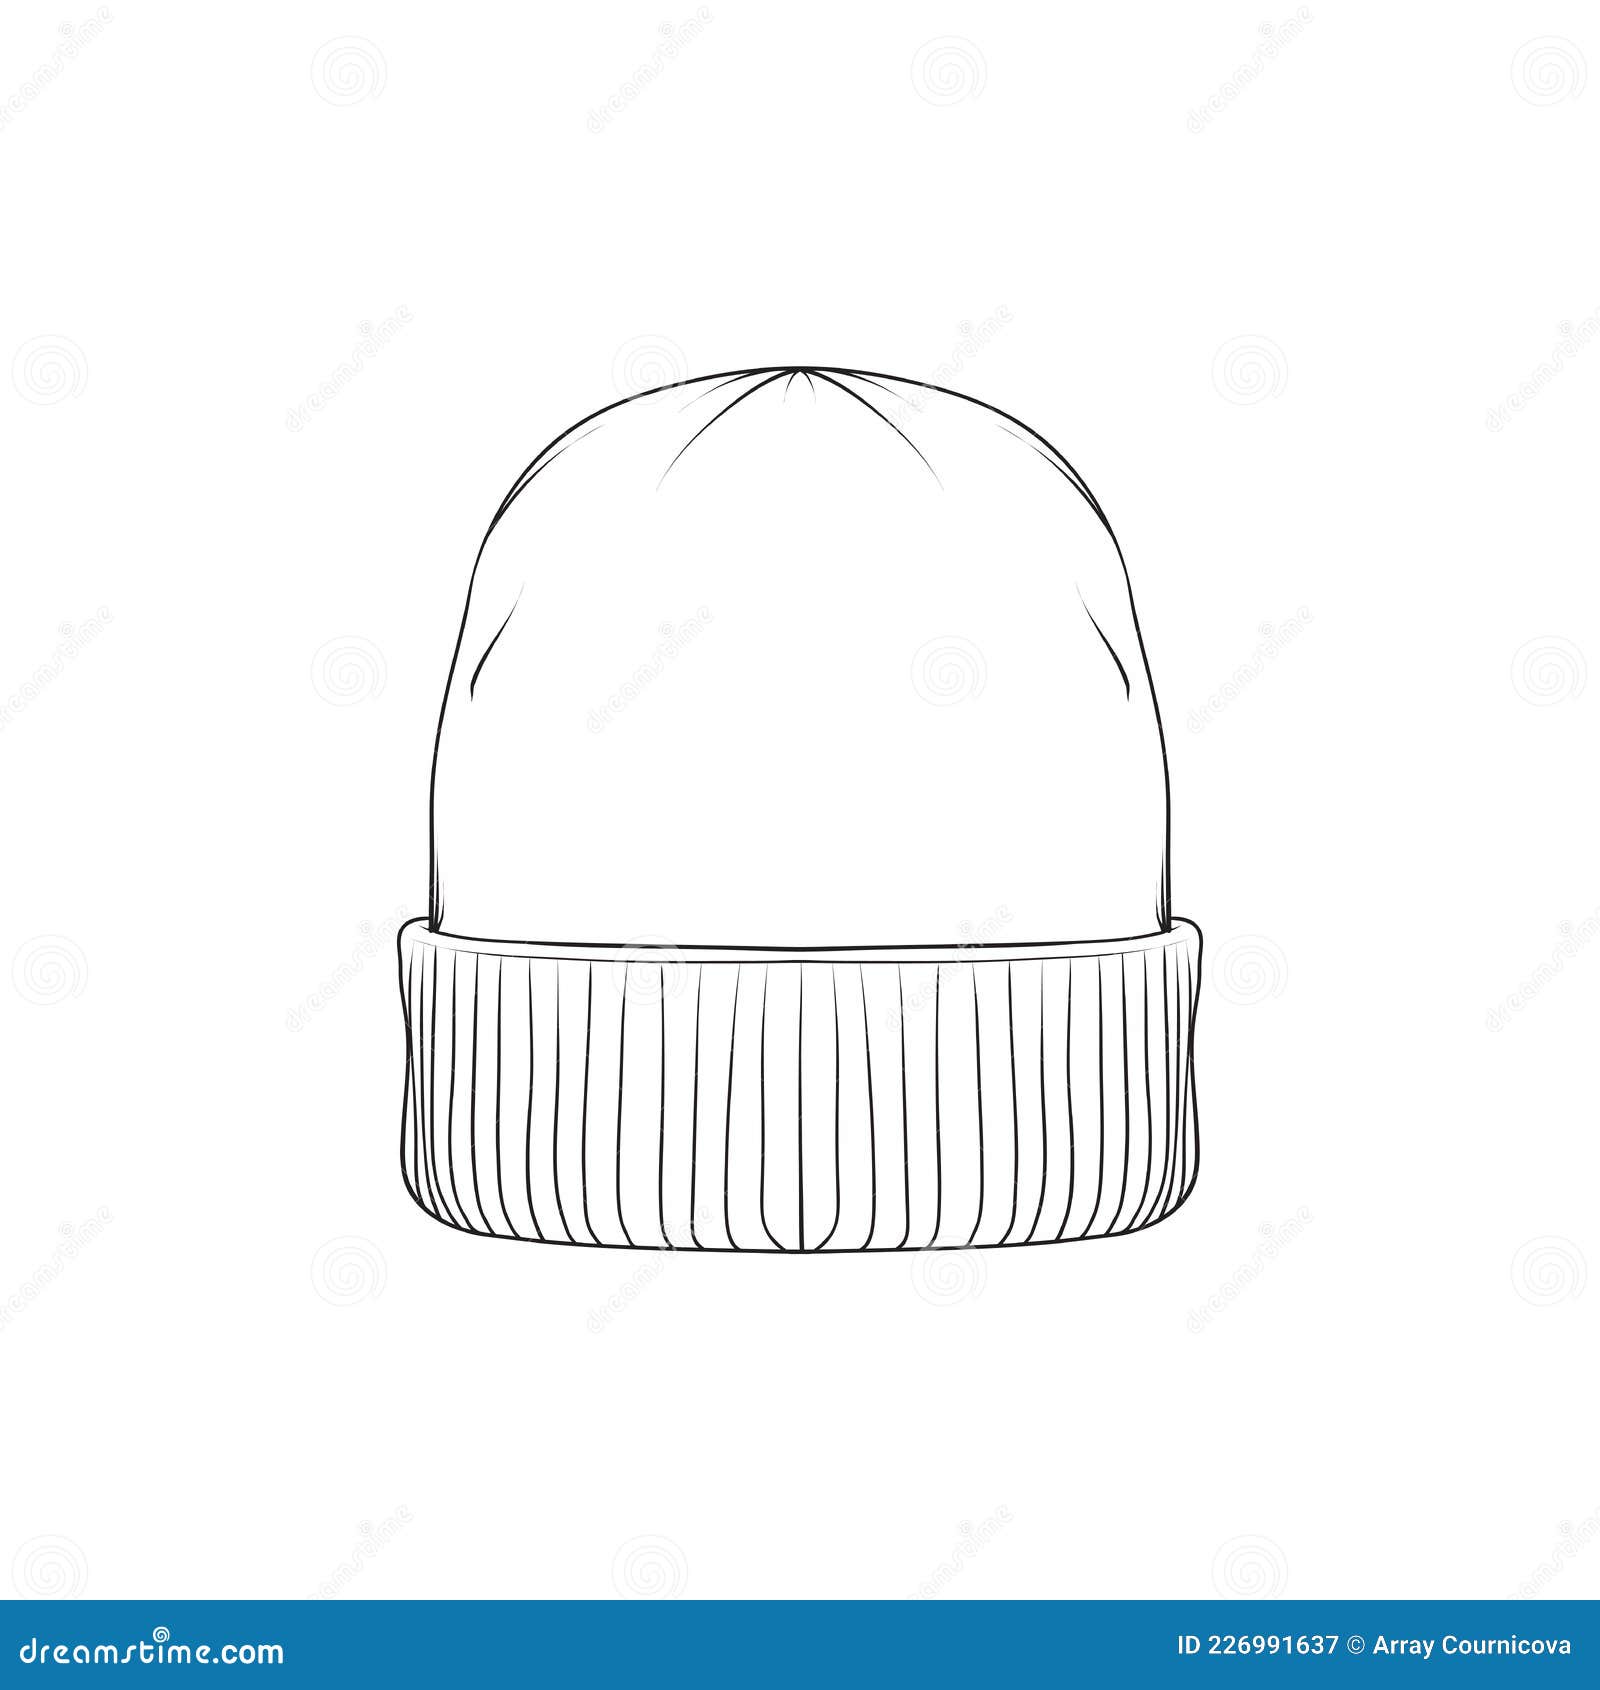 beanie-hat-outline-drawing-vector-beanie-hat-in-a-sketch-style-beanie-hat-trainers-template